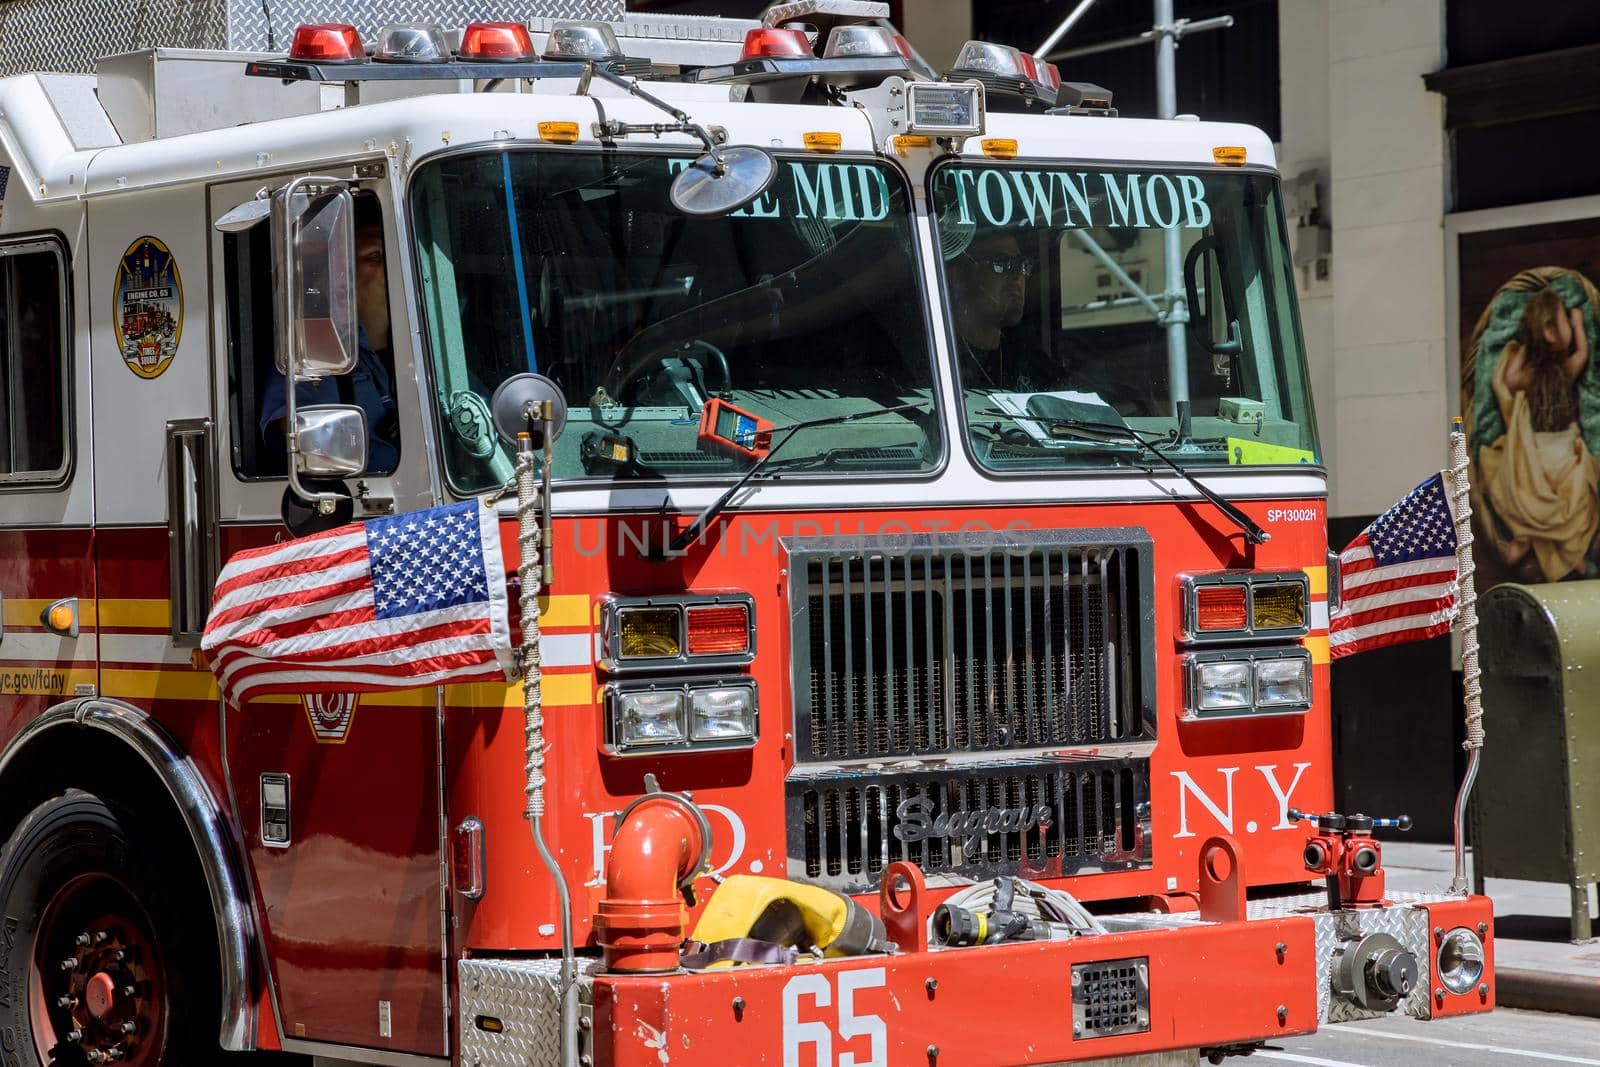 Firetruck responding to an emergency in Manhattan in New York City, USA by ungvar